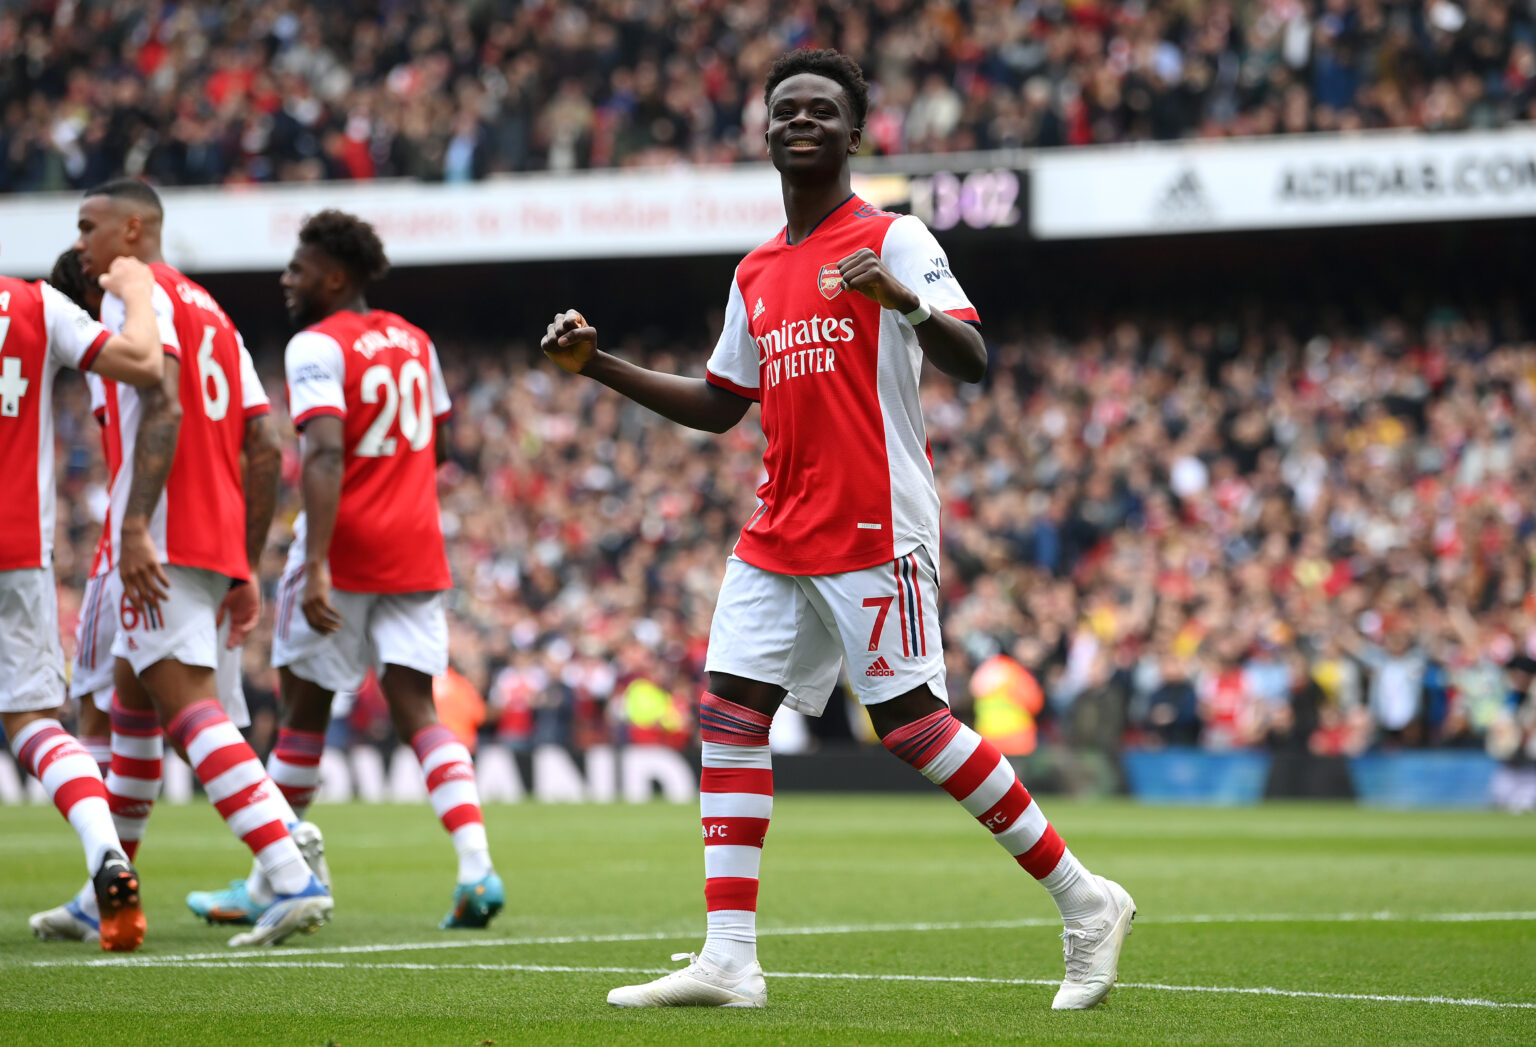 Bukayo Saka - Outstanding young player in the Premier League 2021-2022